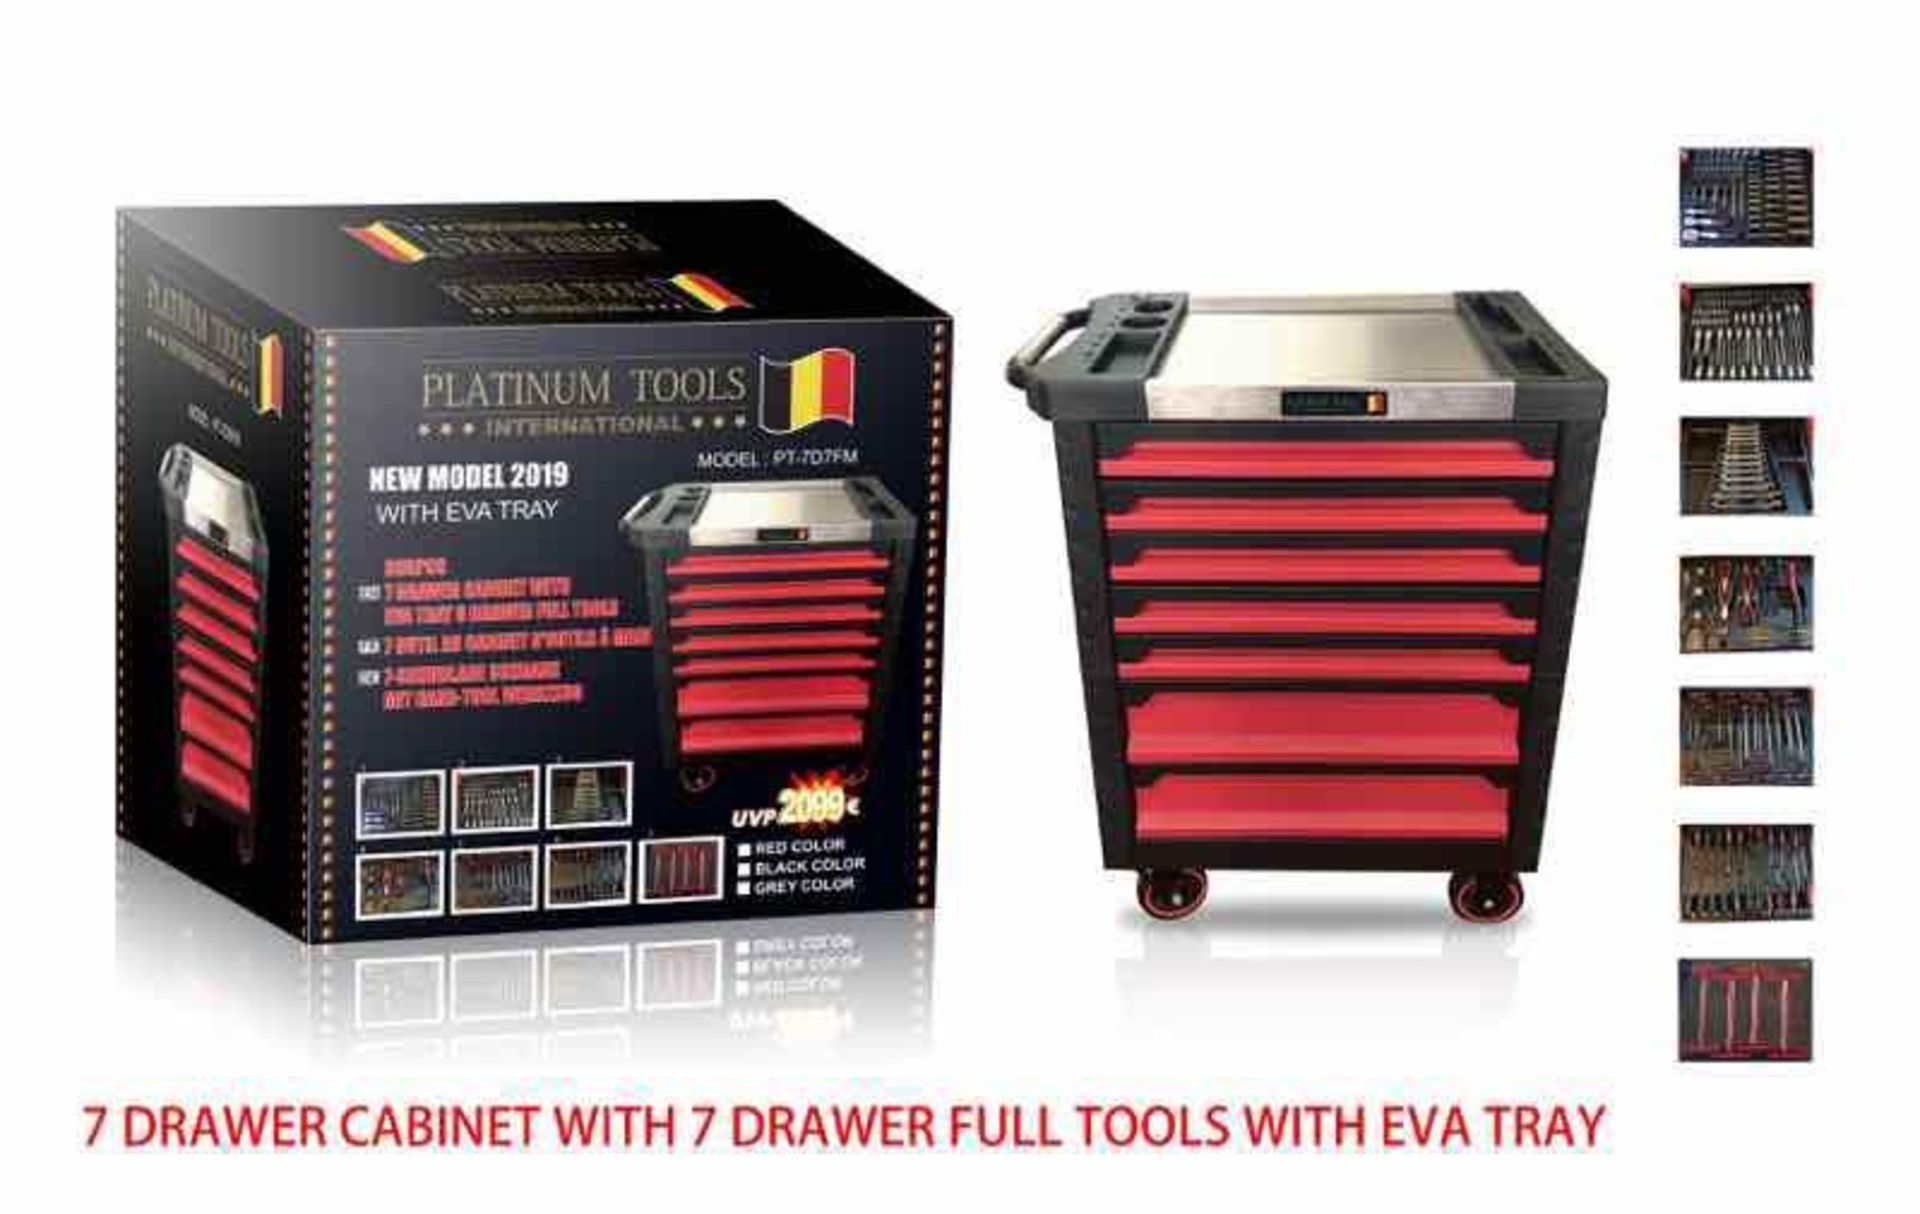 V Brand New Seven Drawer Locking Tool Cabinet With 6 Drawers Full Of Tools And Metal Tray On Top -